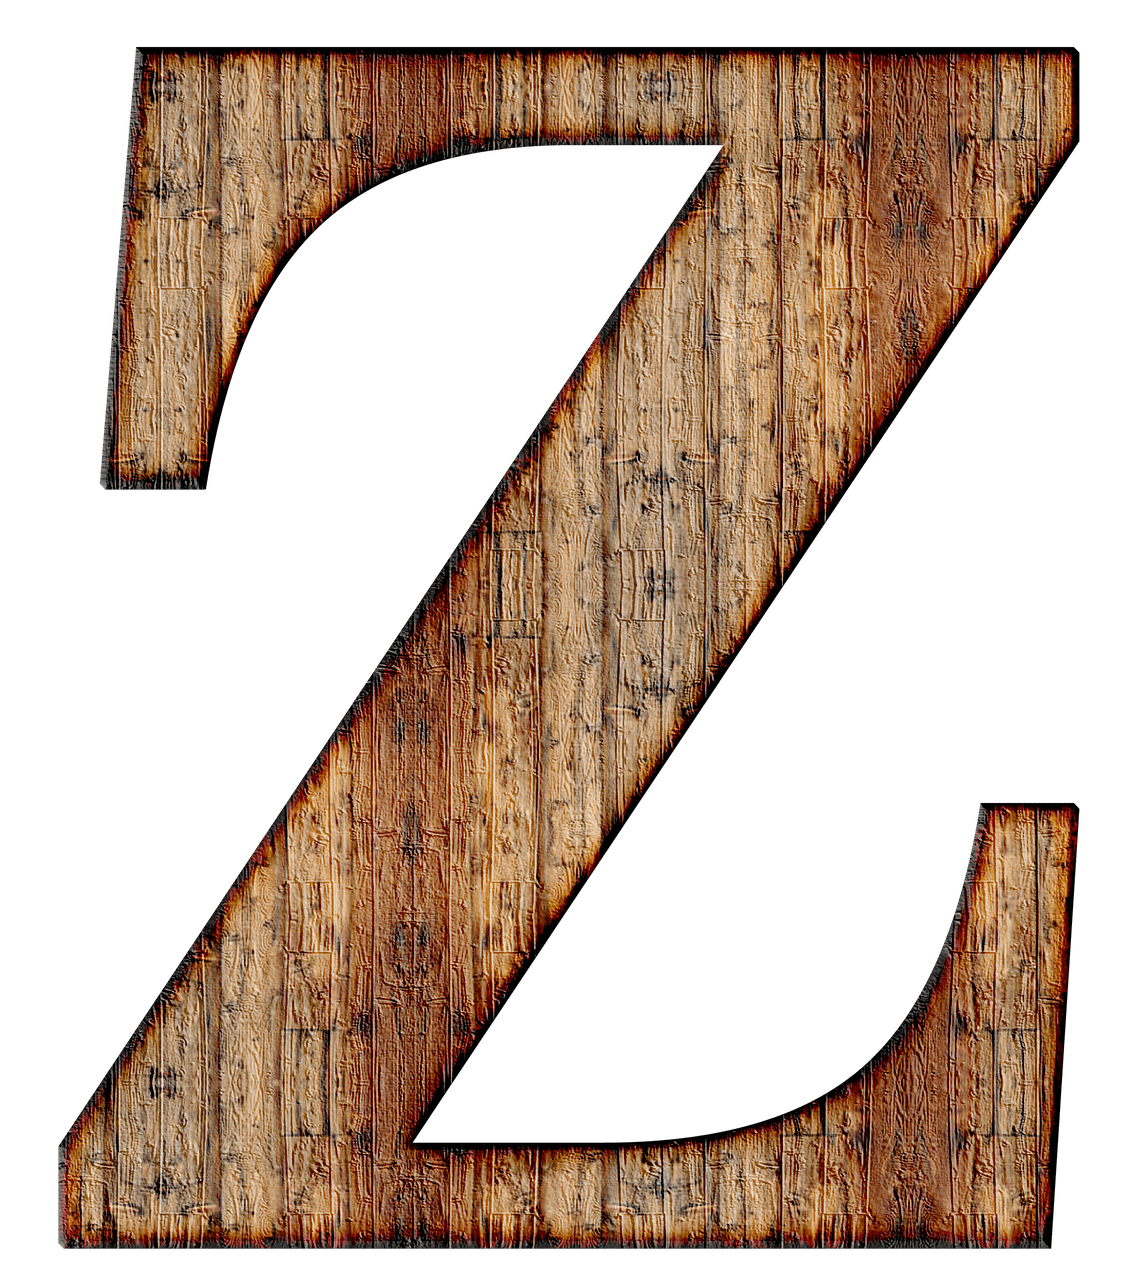 Z Letter PNG Free Download